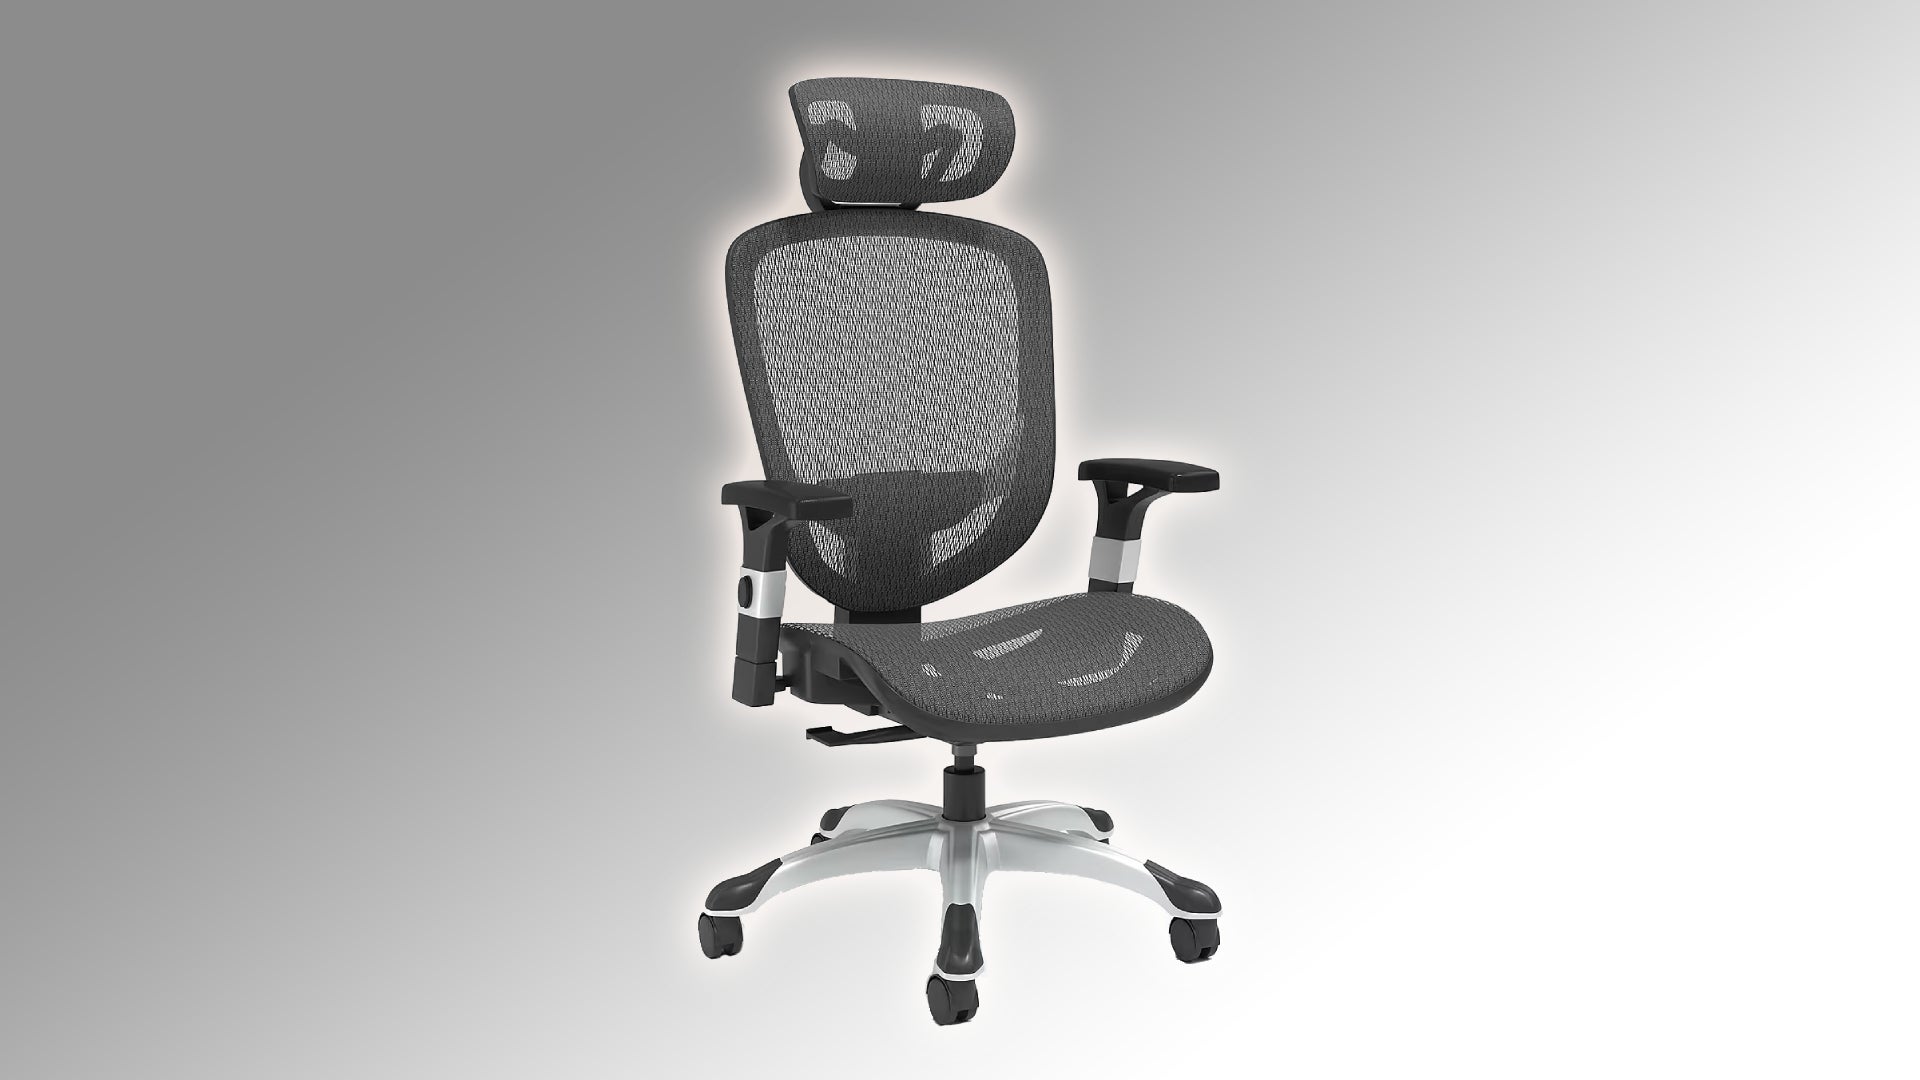 Save 53% on this comfy office chair at Staples in the US for Cyber 